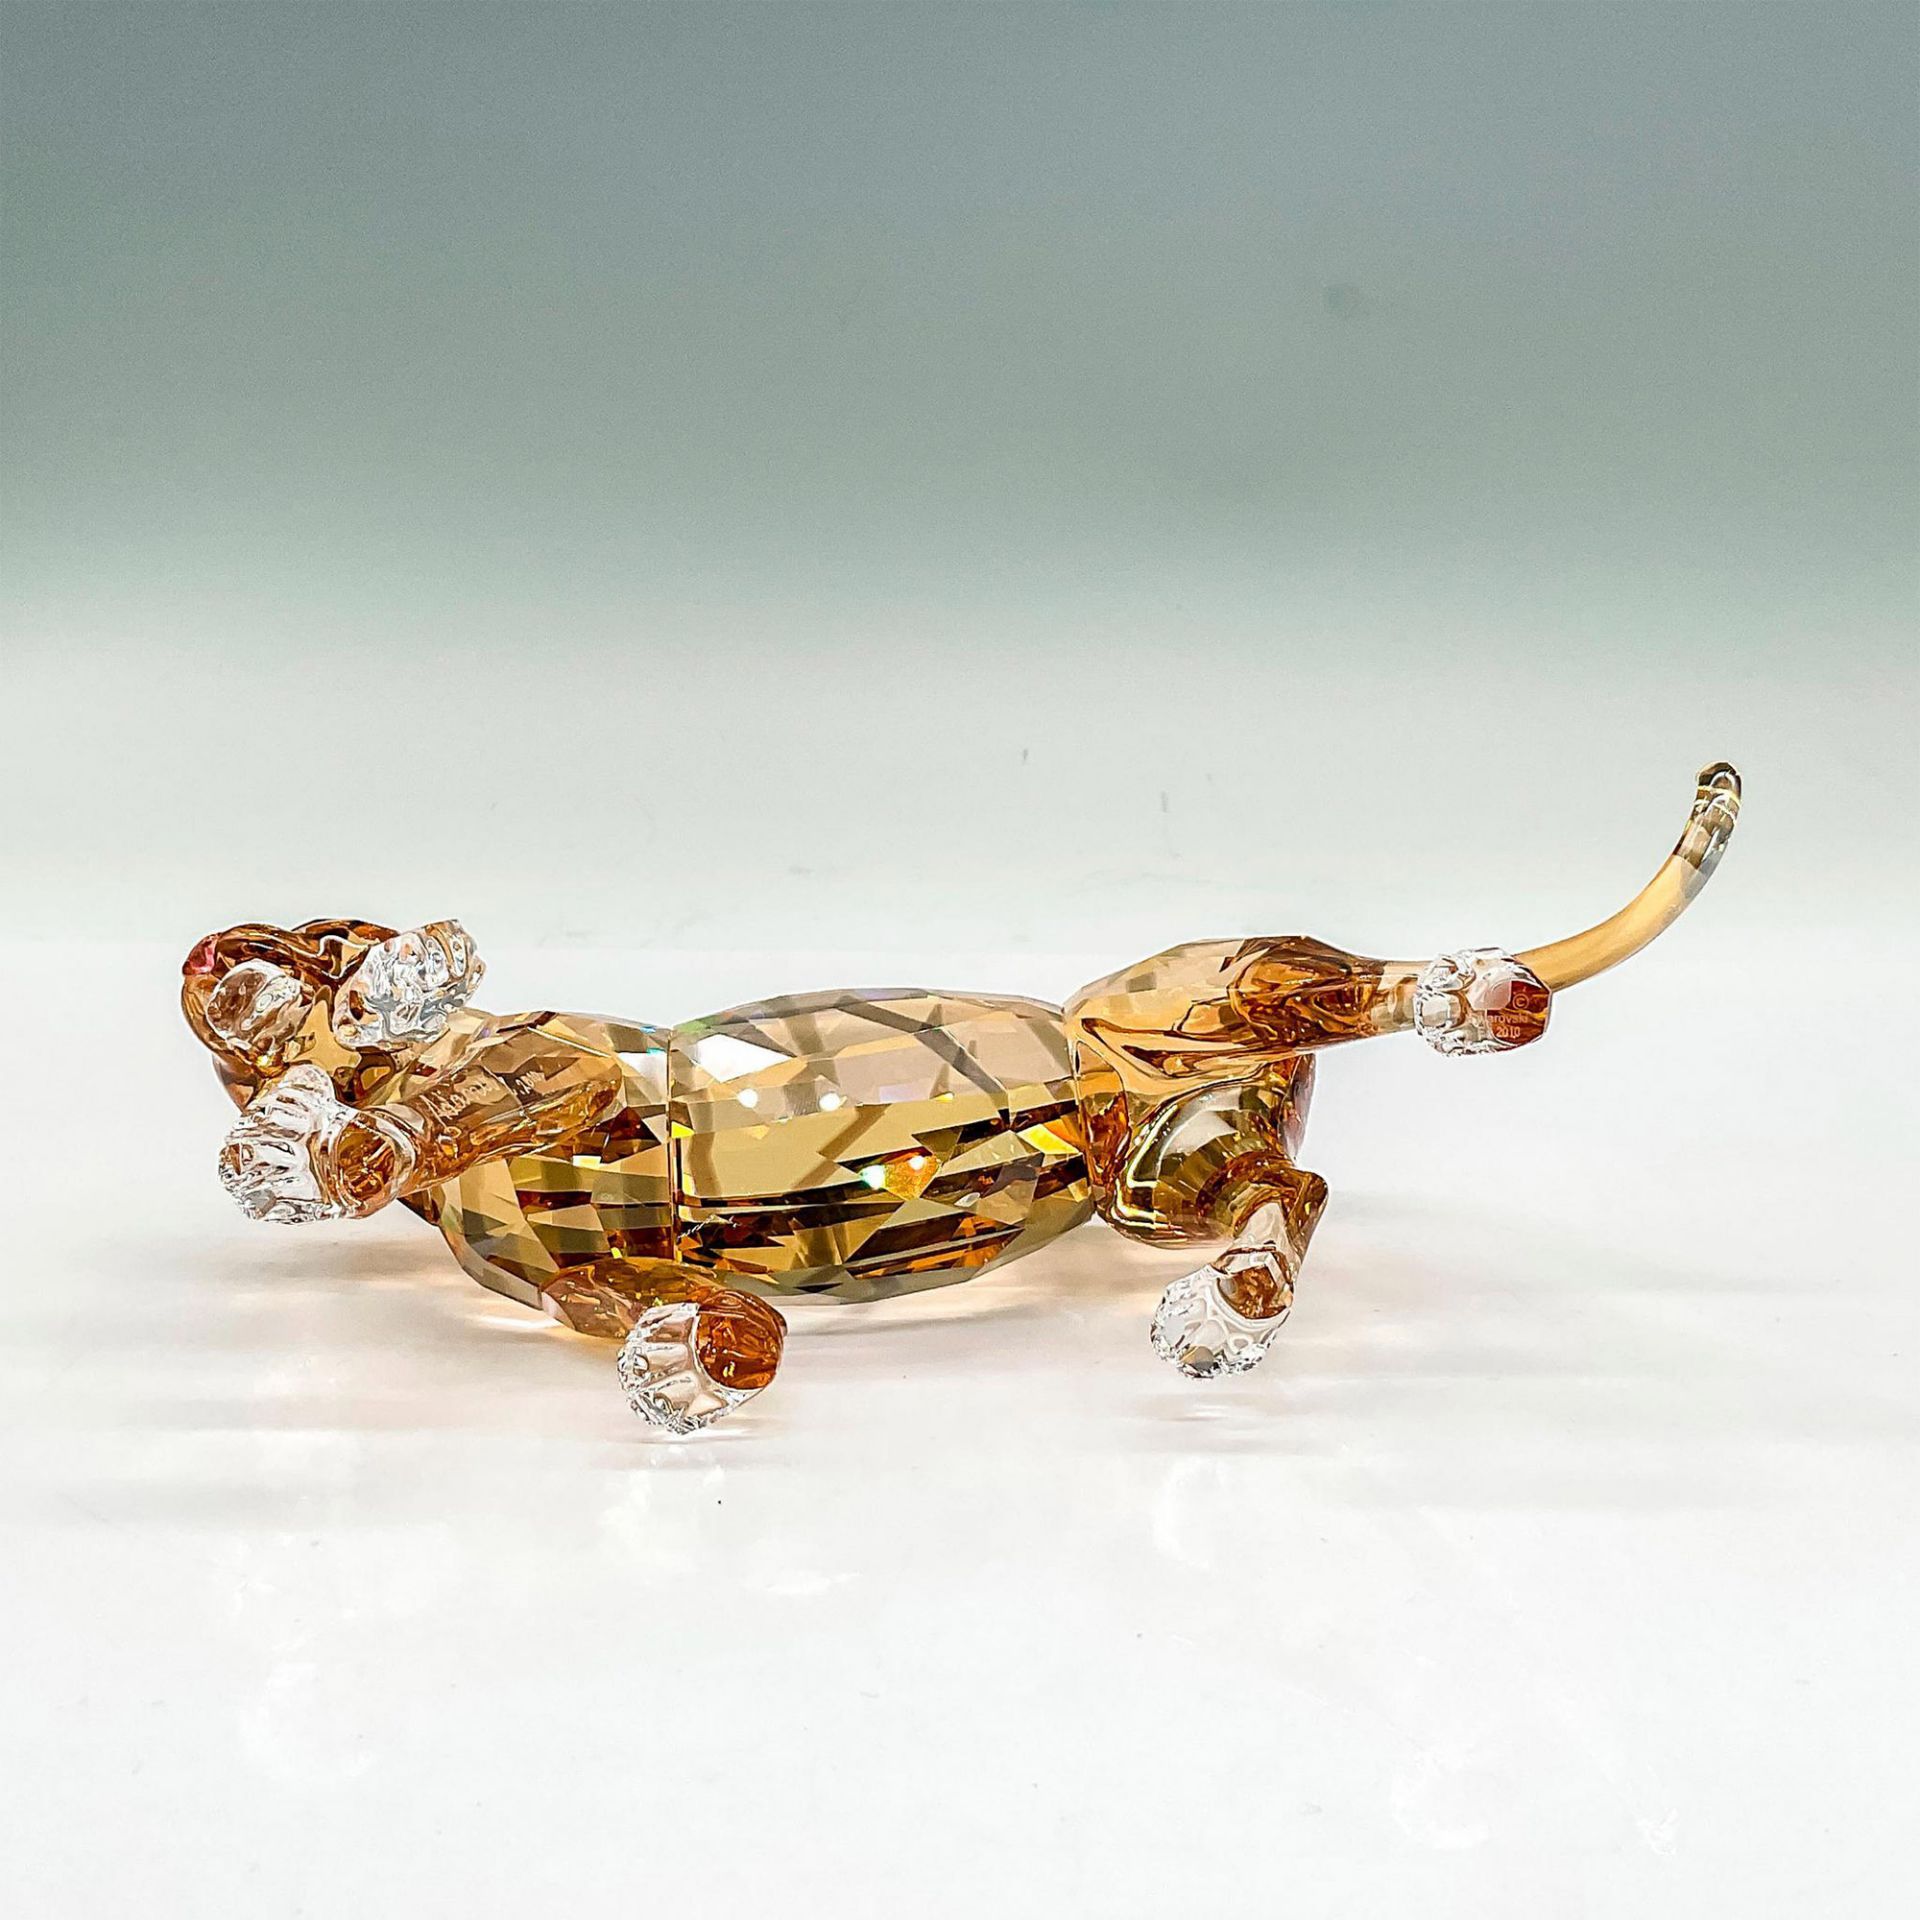 3pc Swarovski Crystal Figurines, Tiger and Cubs - Image 7 of 8